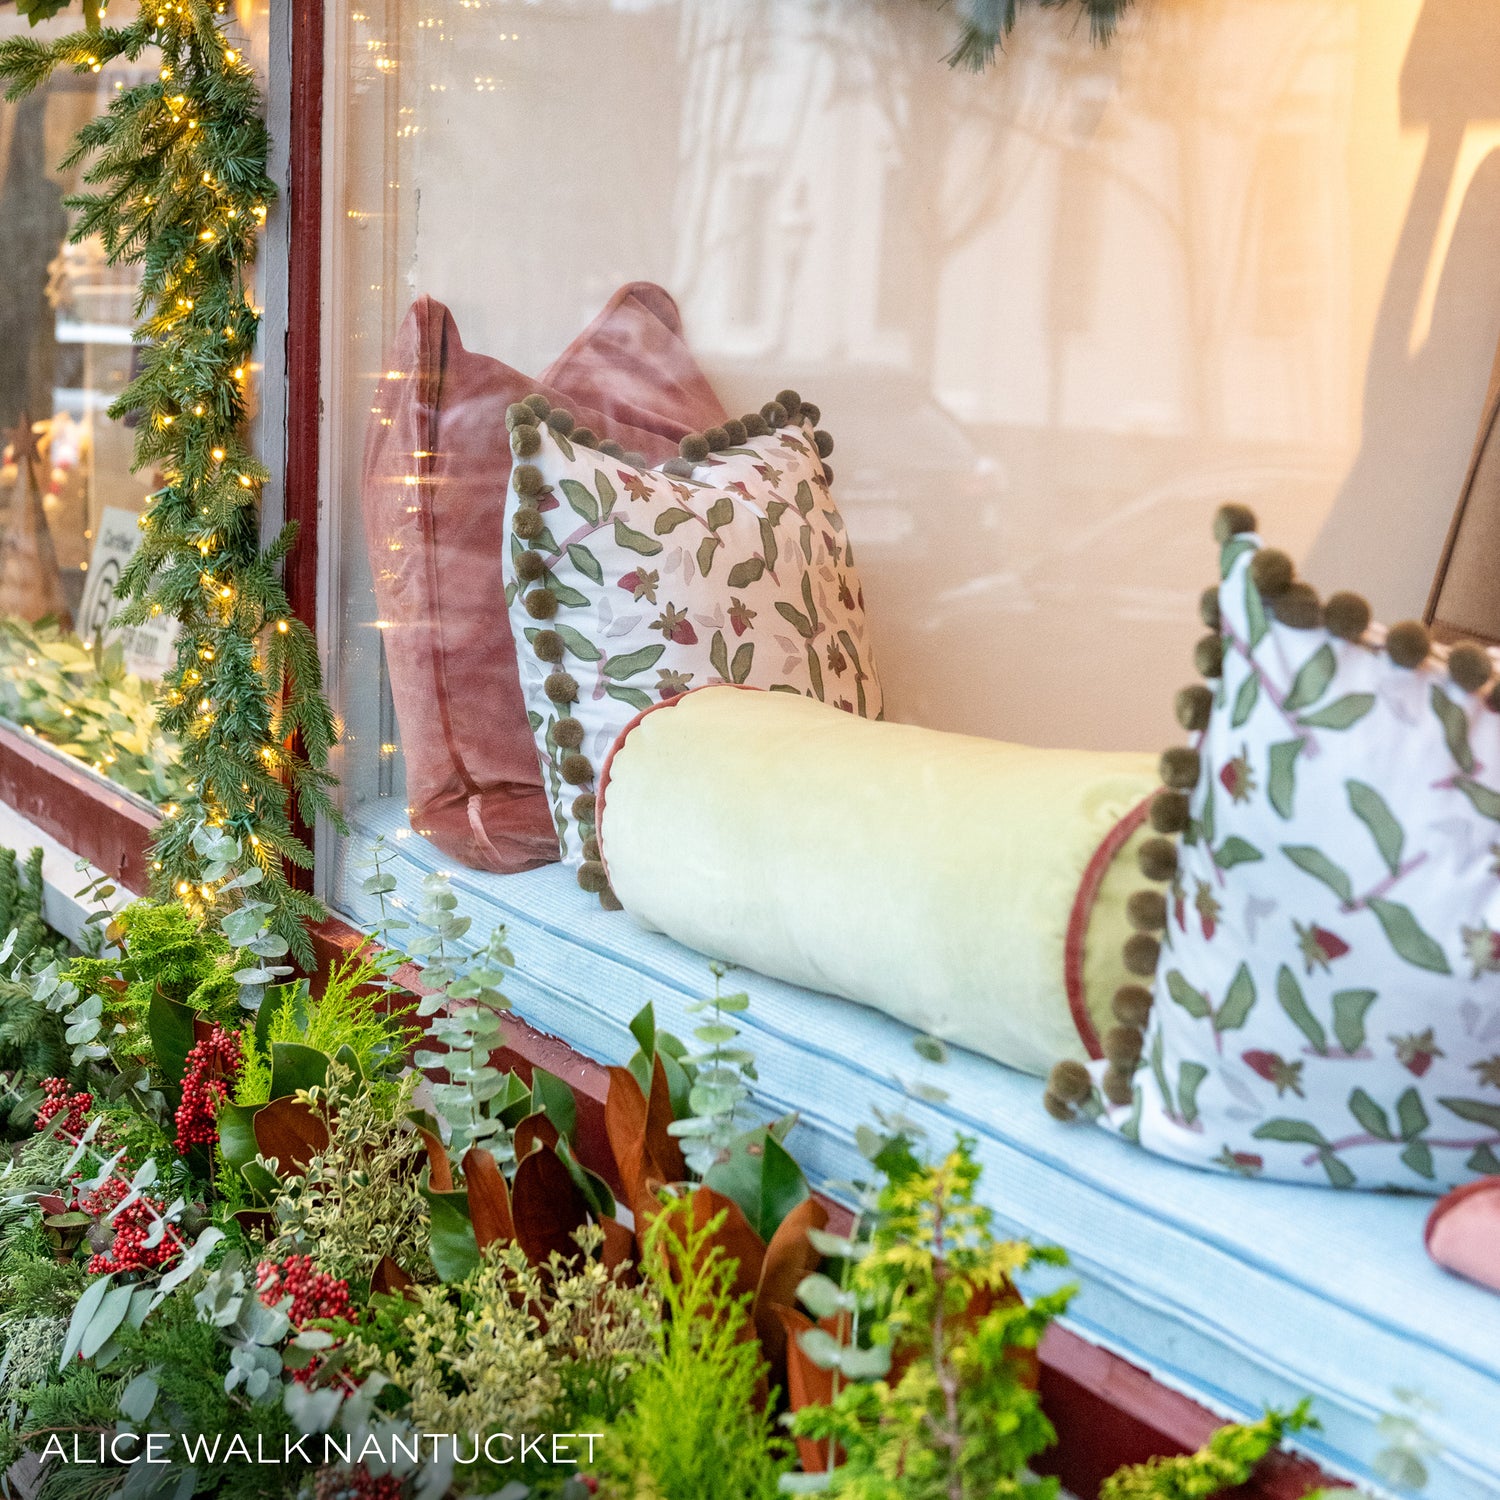 exterior image of a window with four green and dark pink pillows on a blue window bench